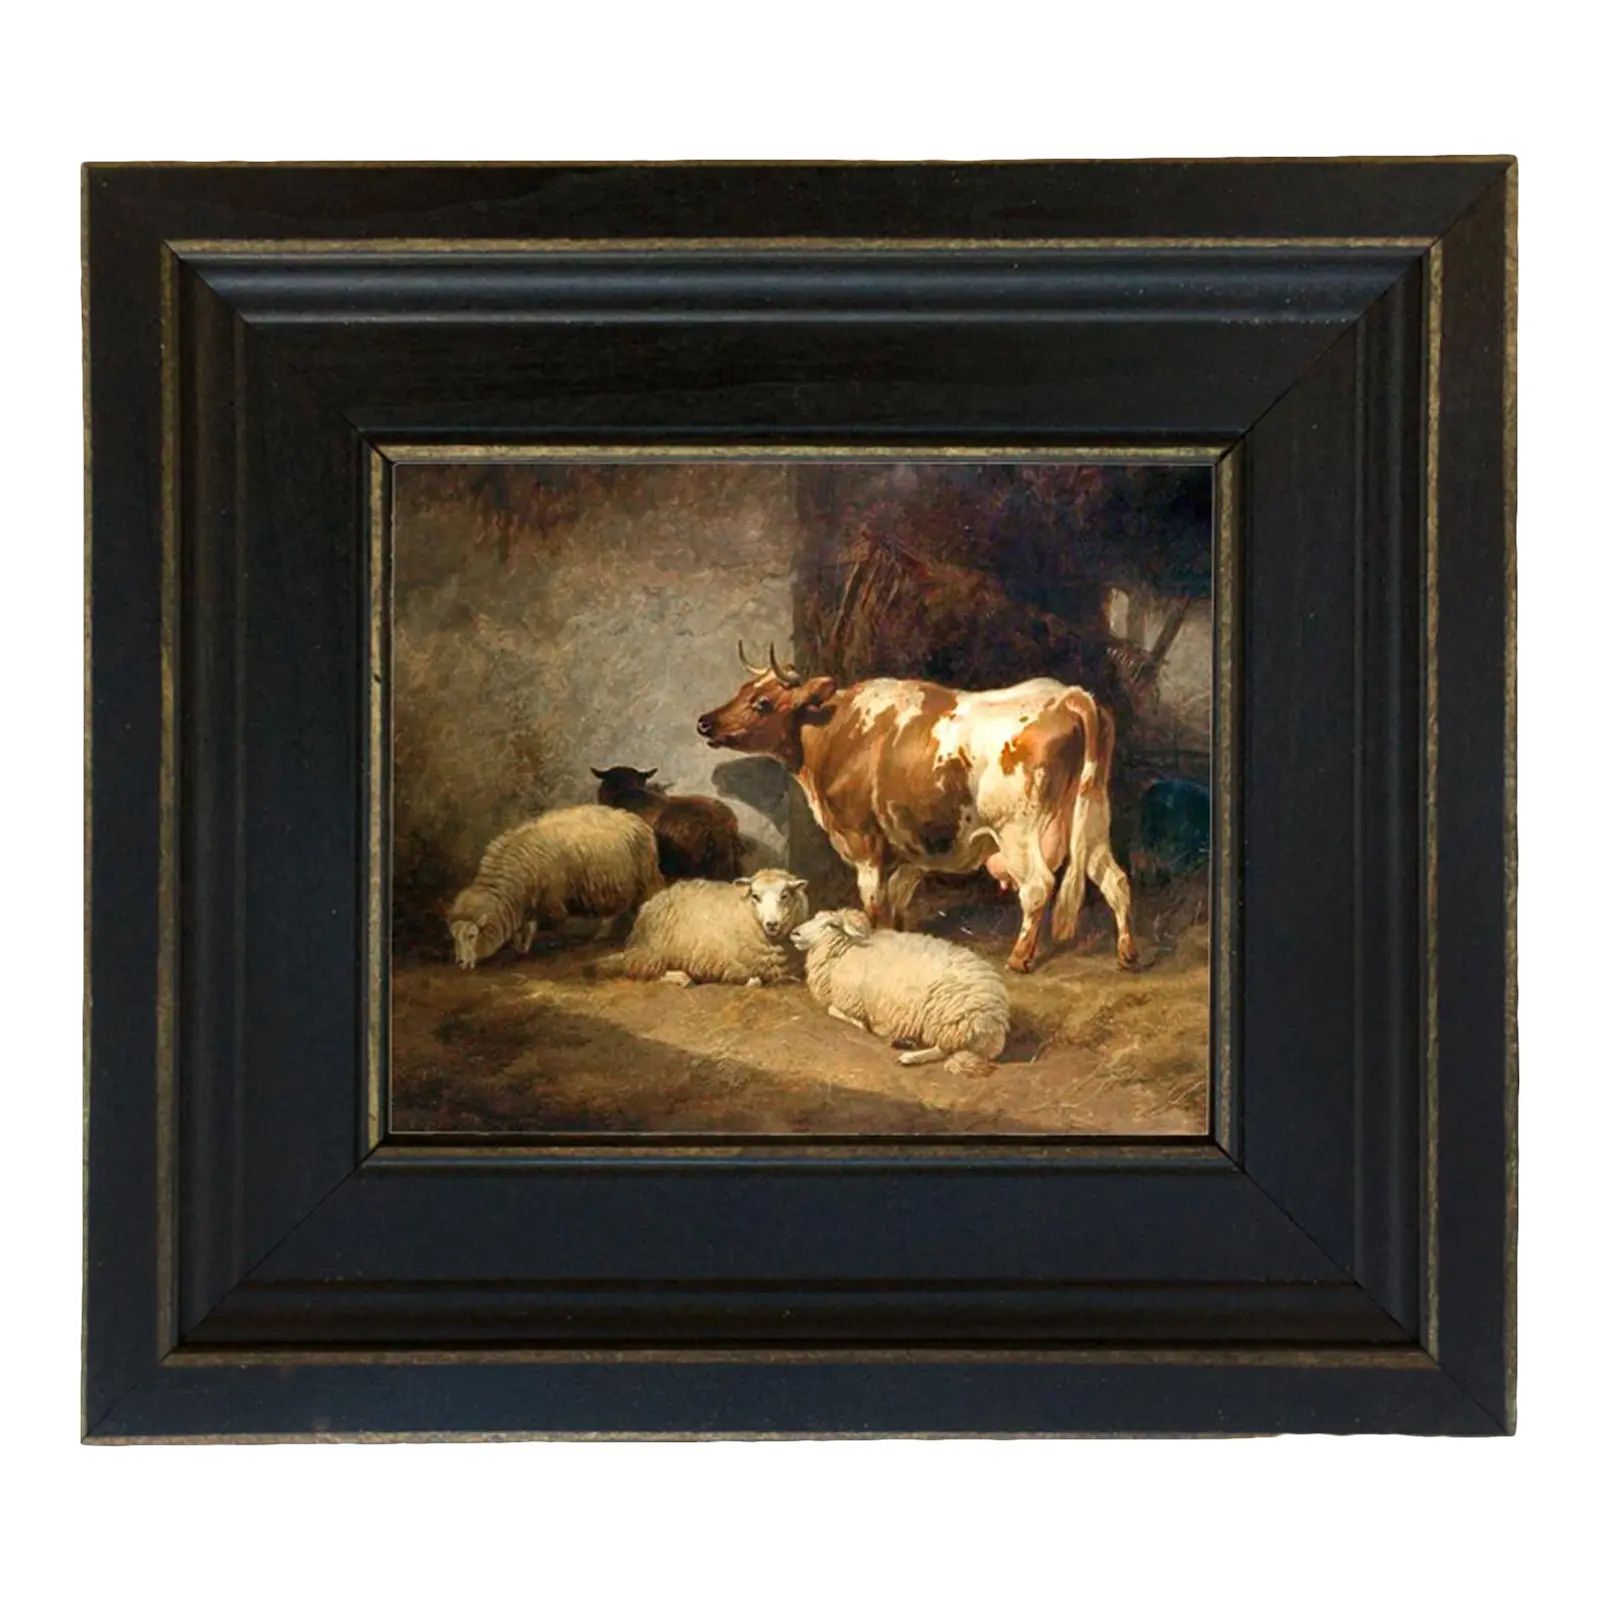 Cow and Sheep Framed Oil Painting Reproduction Print on Canvas - 5" X 6" | Chairish